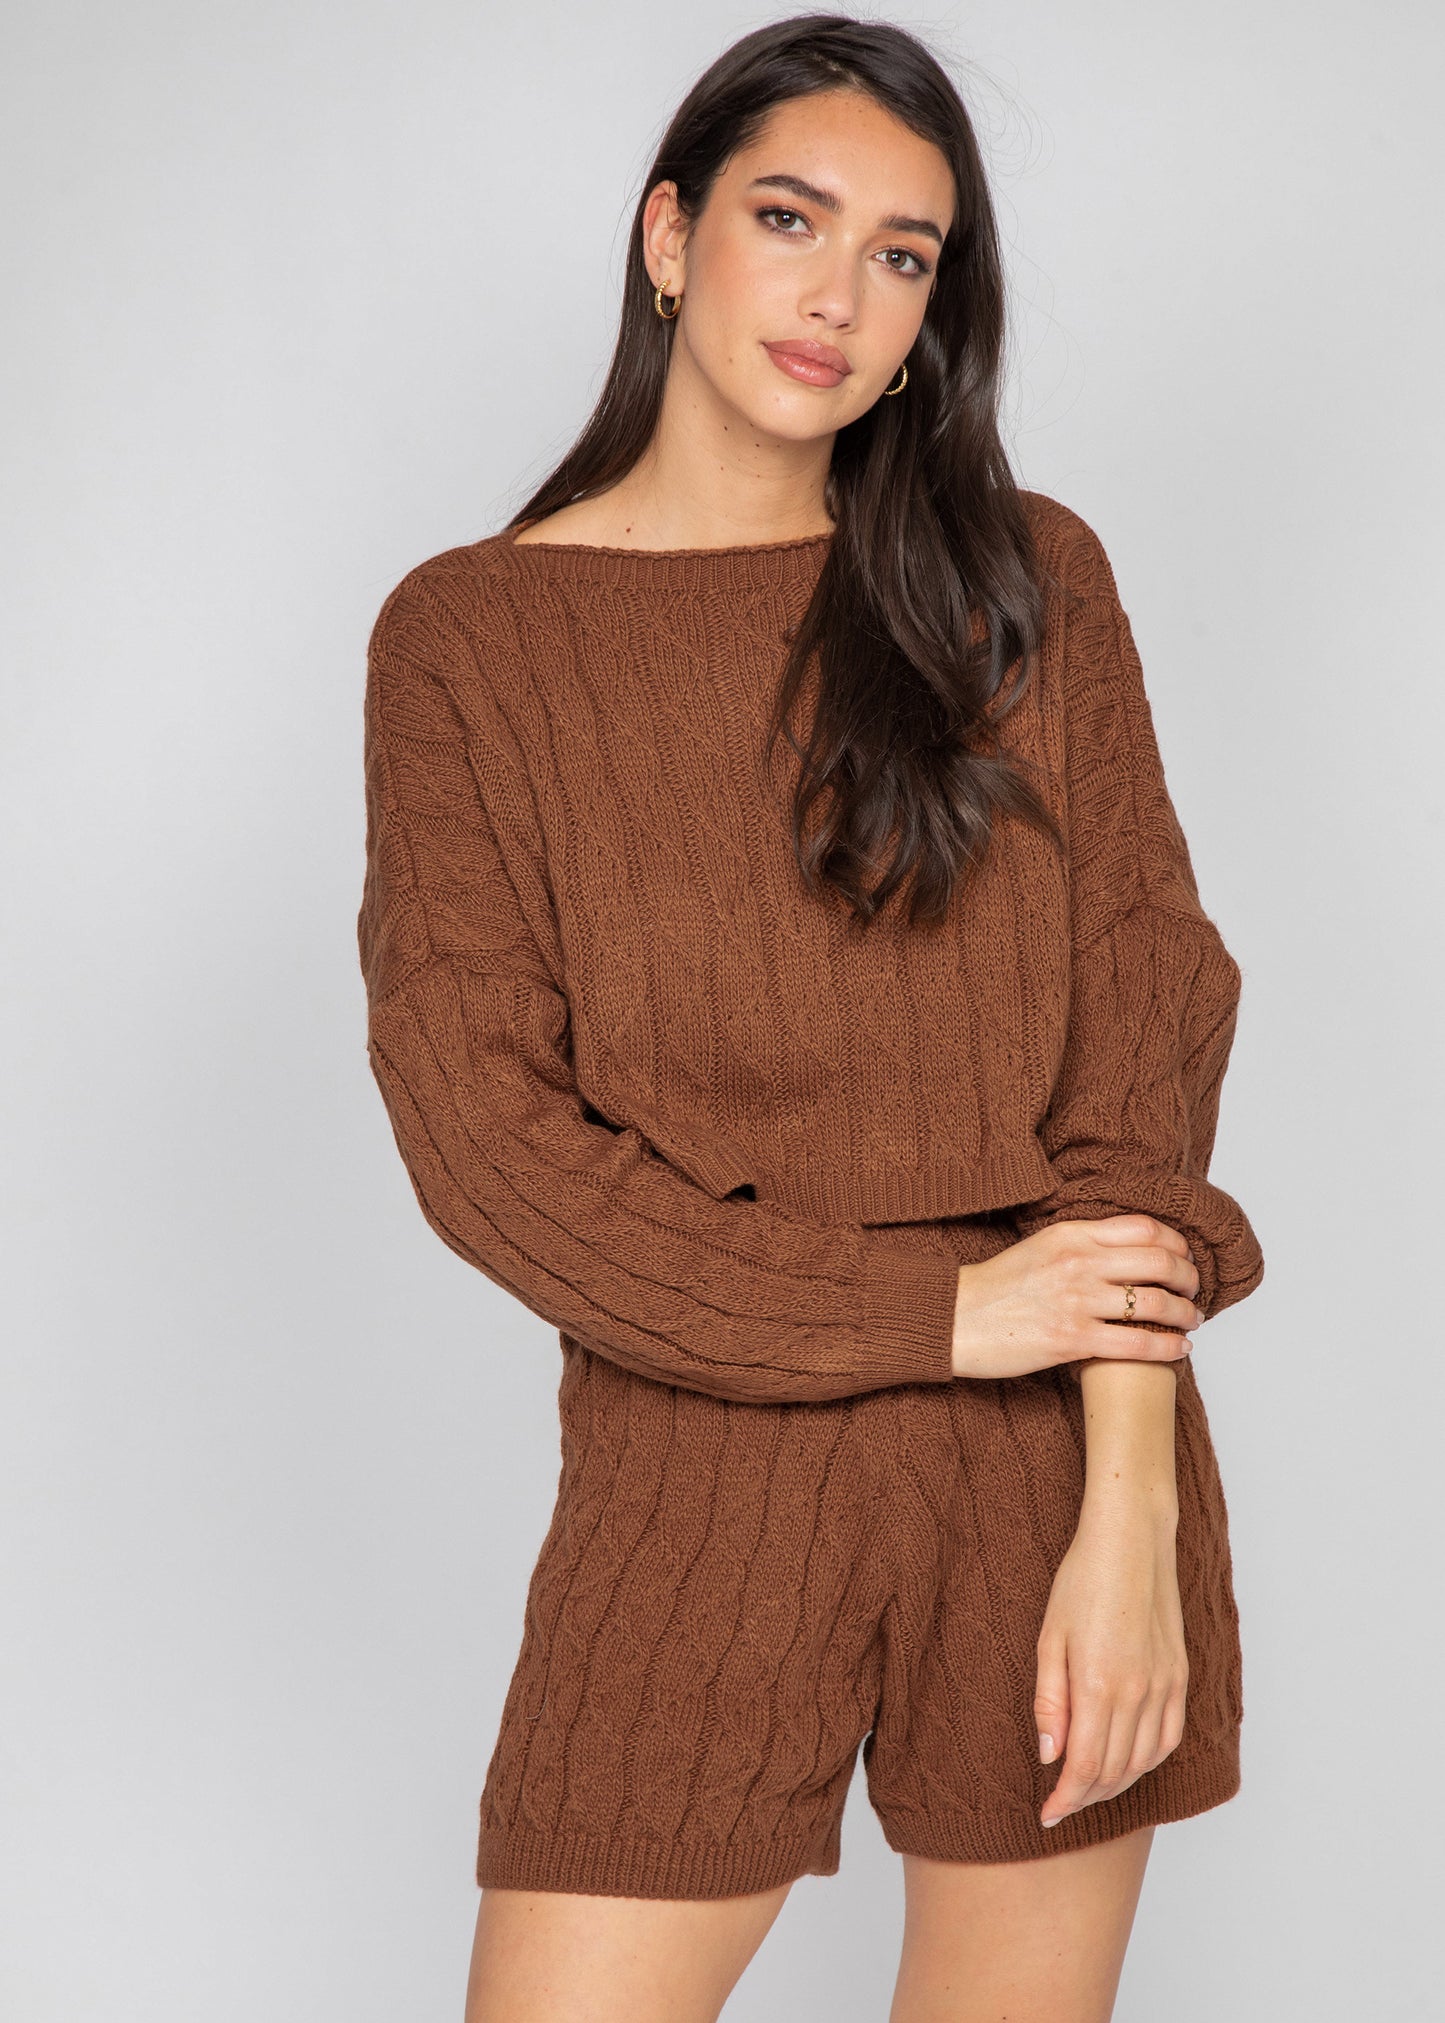 Cable knit jumper and shorts co-ord in brown